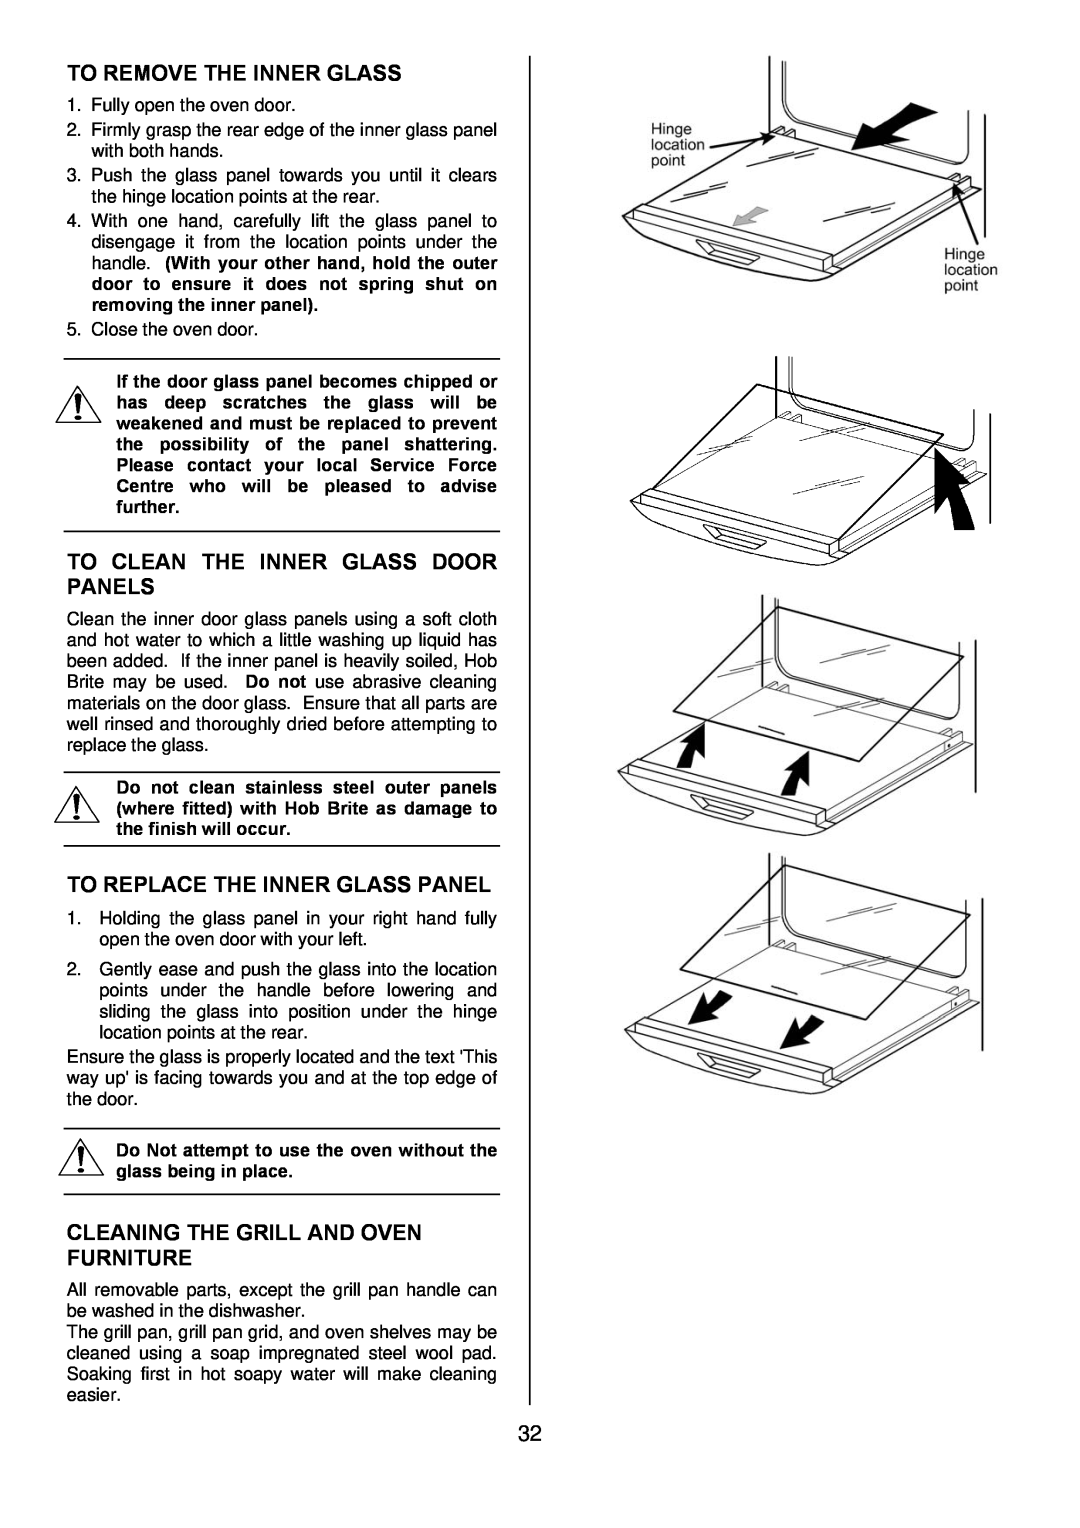 Electrolux D4101-5 manual To Remove The Inner Glass, To Clean The Inner Glass Door Panels, To Replace The Inner Glass Panel 